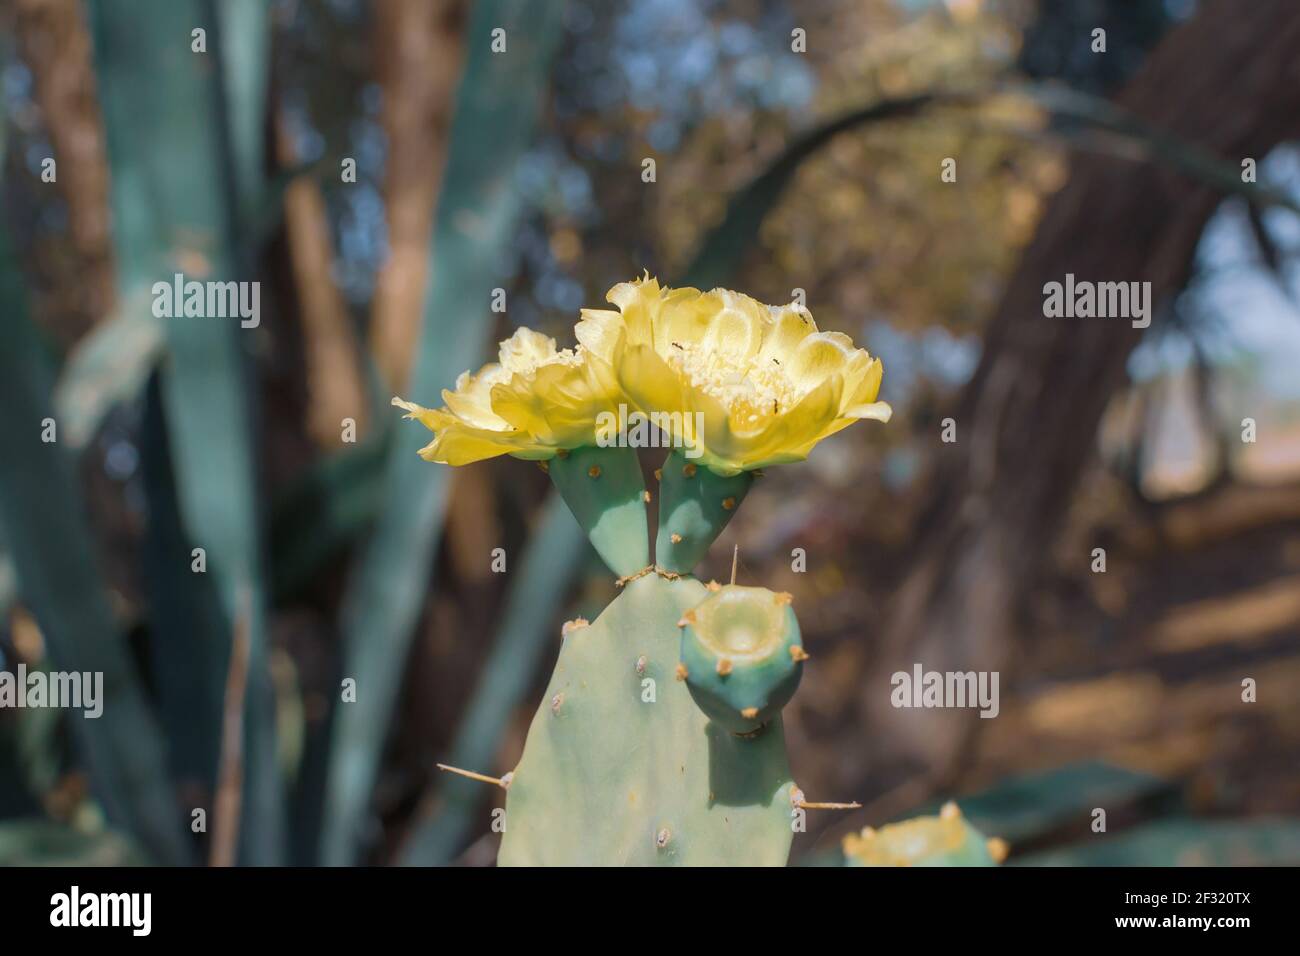 Prickly Pear Cactus with Yellow Flower. Opuntia, ficus-indica, Indian fig opuntia, barbary fig, blooming cactus pear Stock Photo